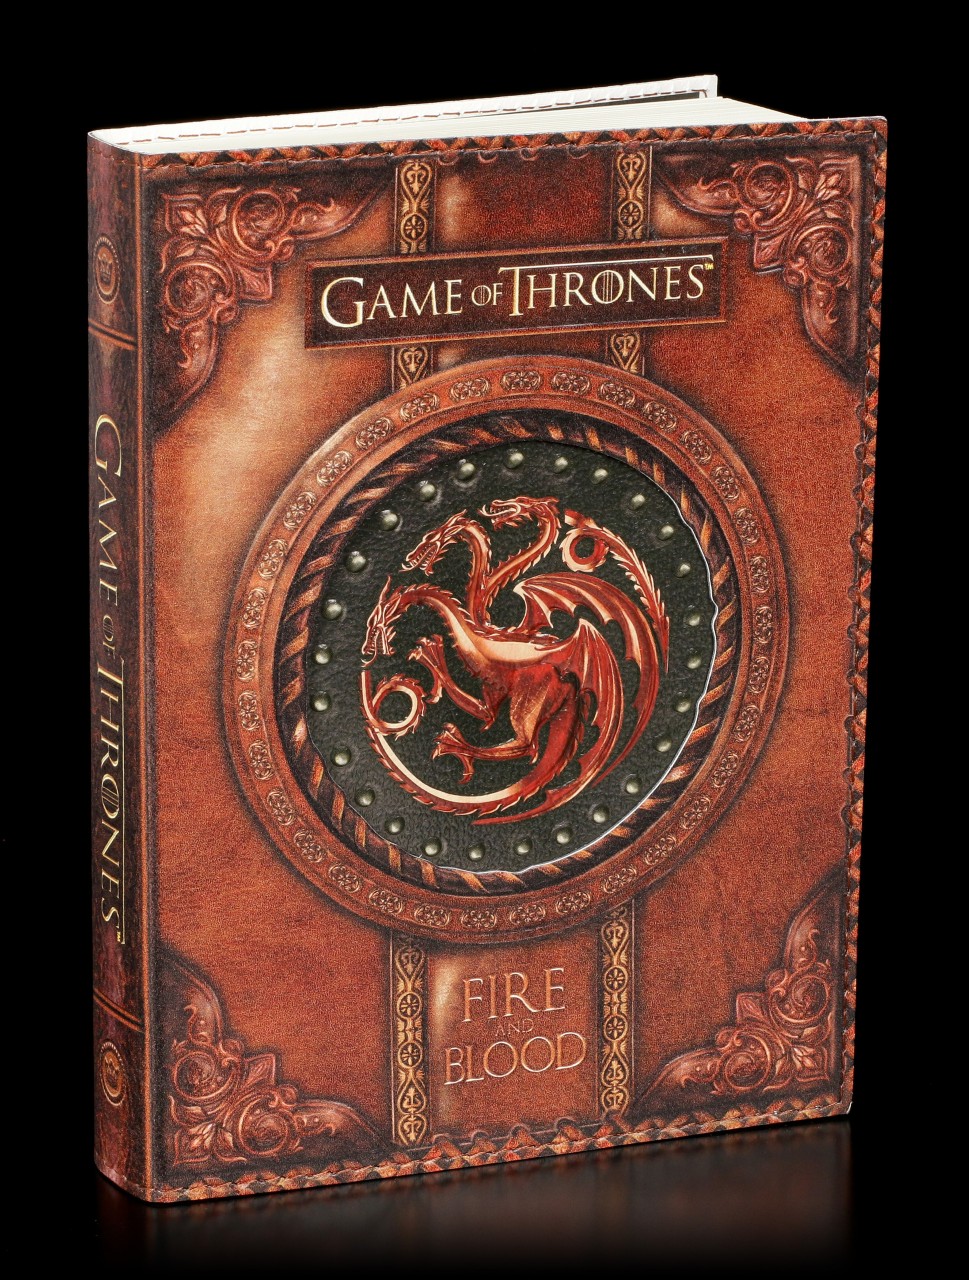 Game of Thrones Notizbuch - Fire and Blood